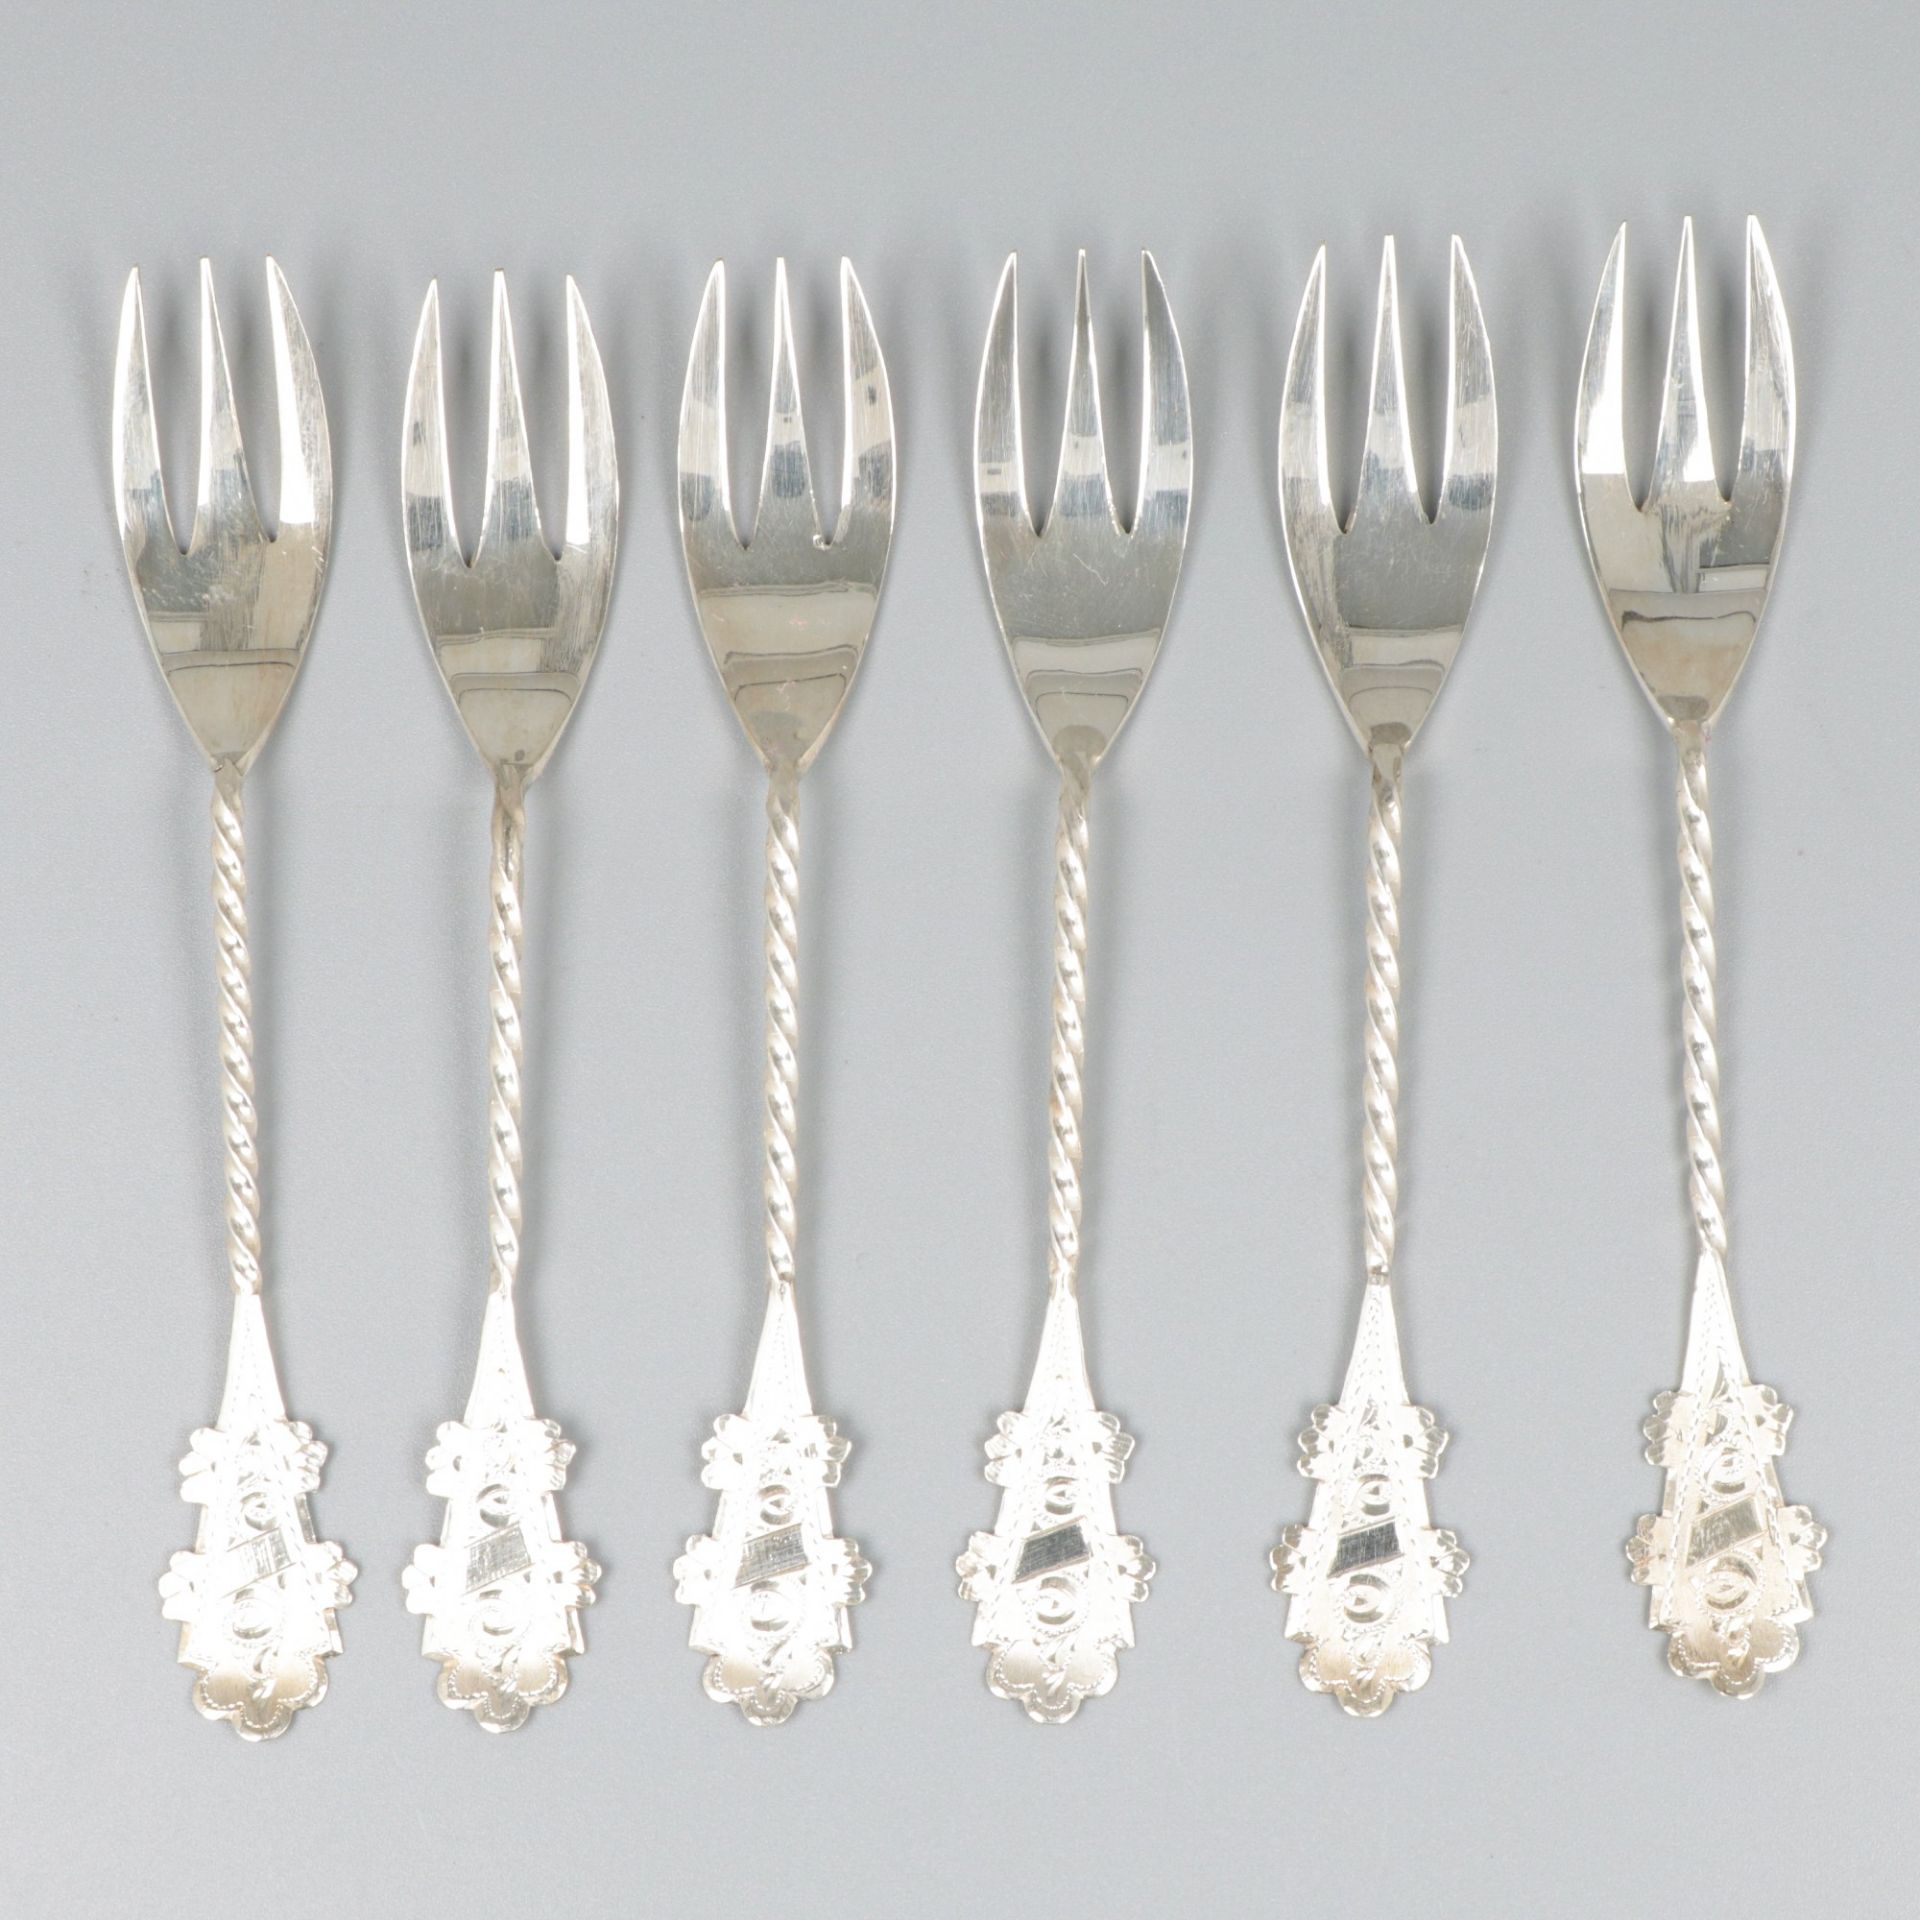 6-piece set of cake / pastry forks silver. - Image 3 of 9